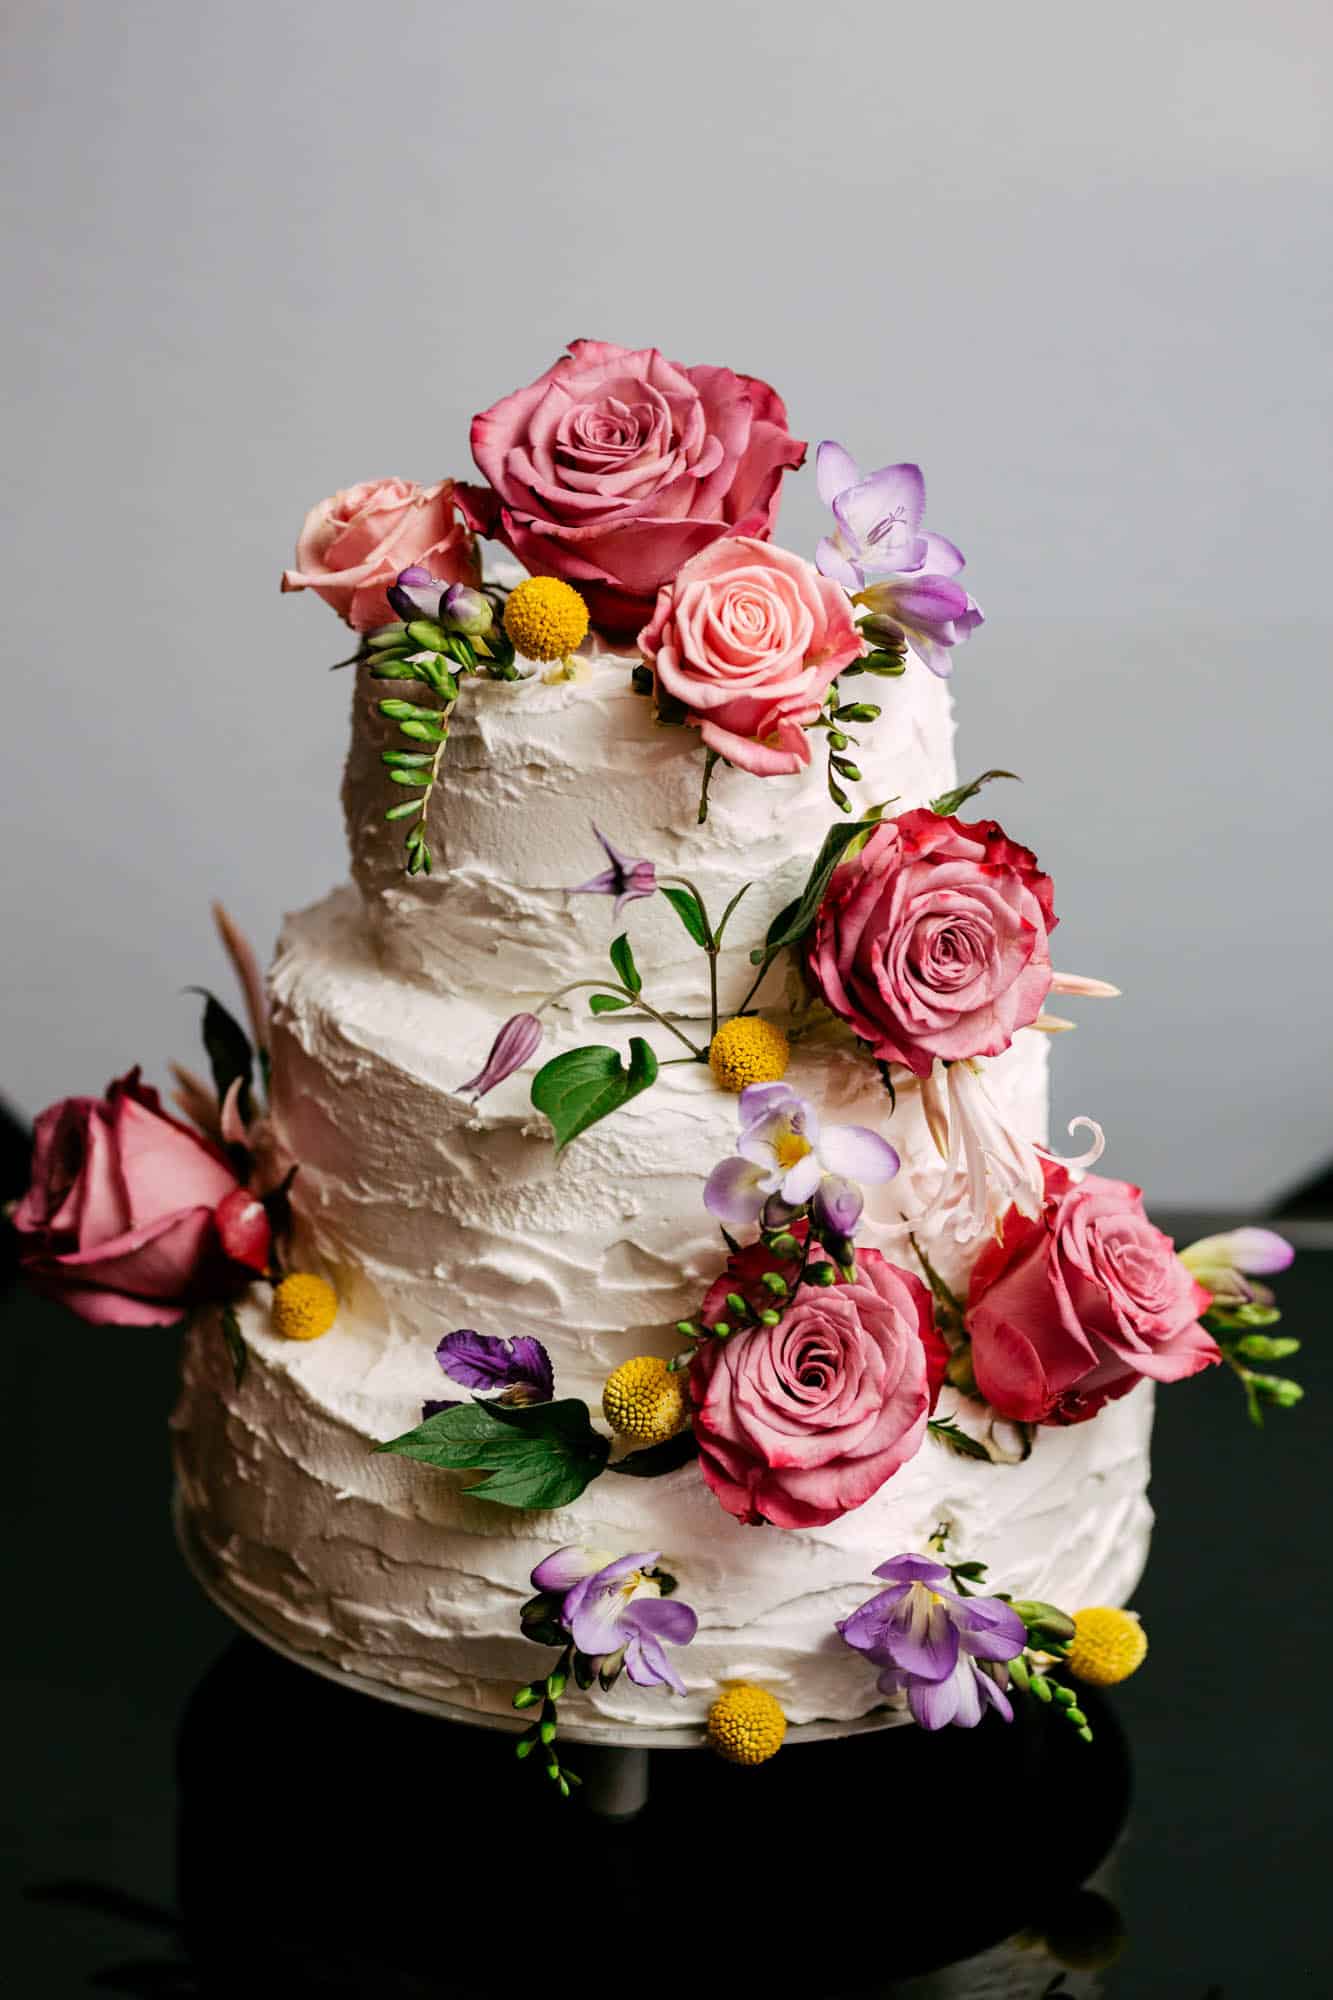 A white wedding cake with pink and purple flowers on top.